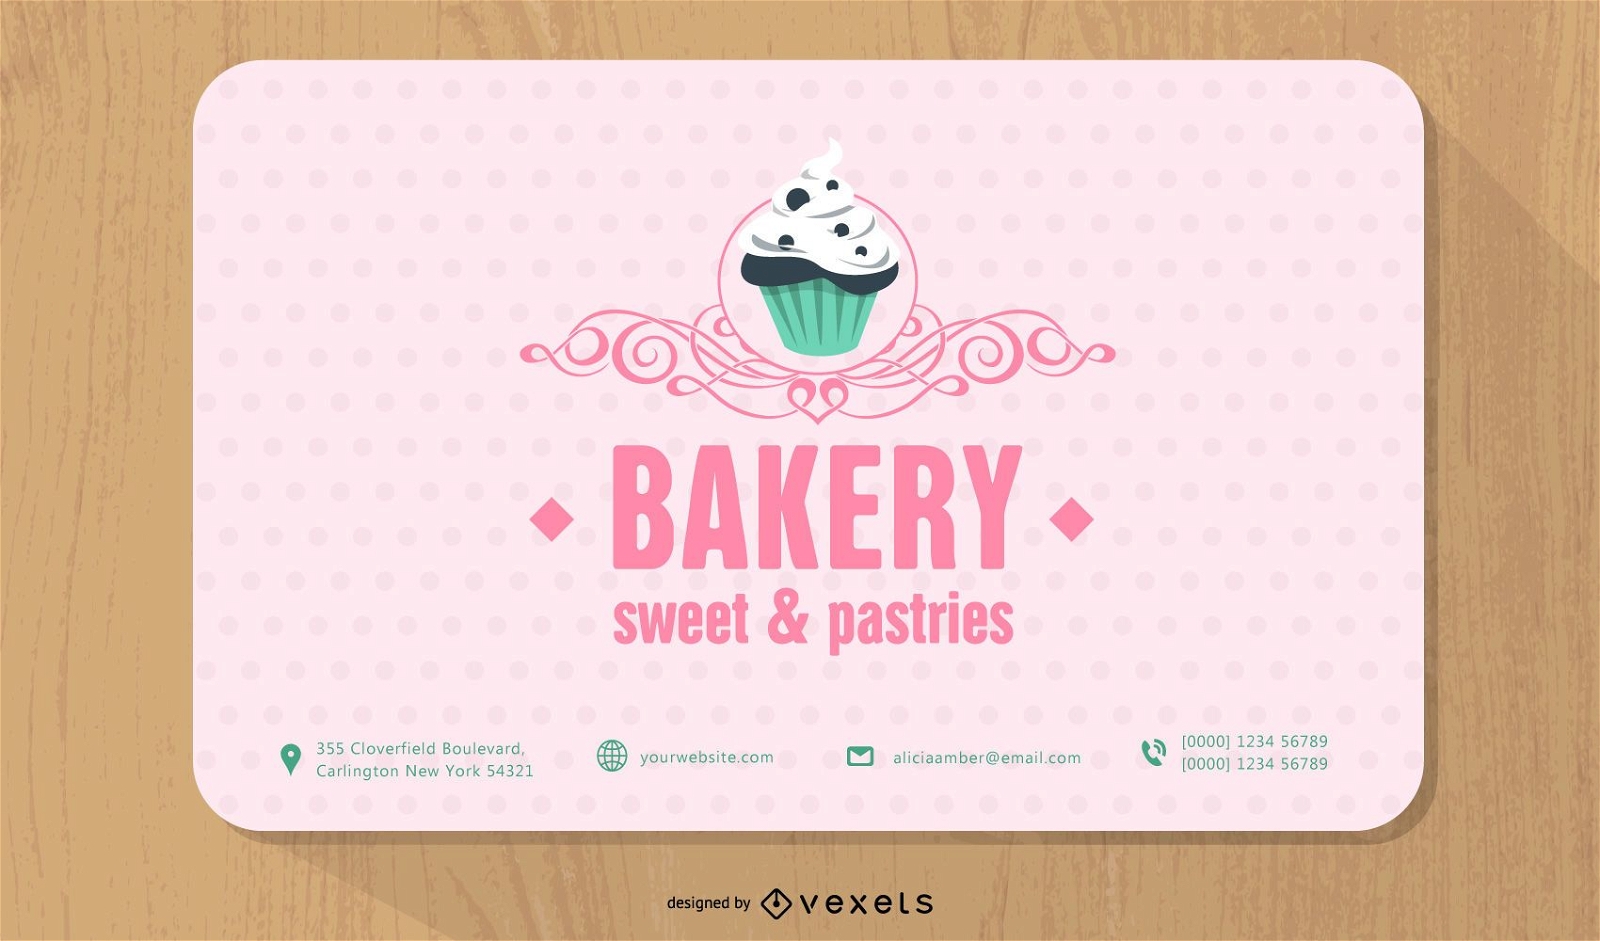 Bakery Round Corner Business Card Template